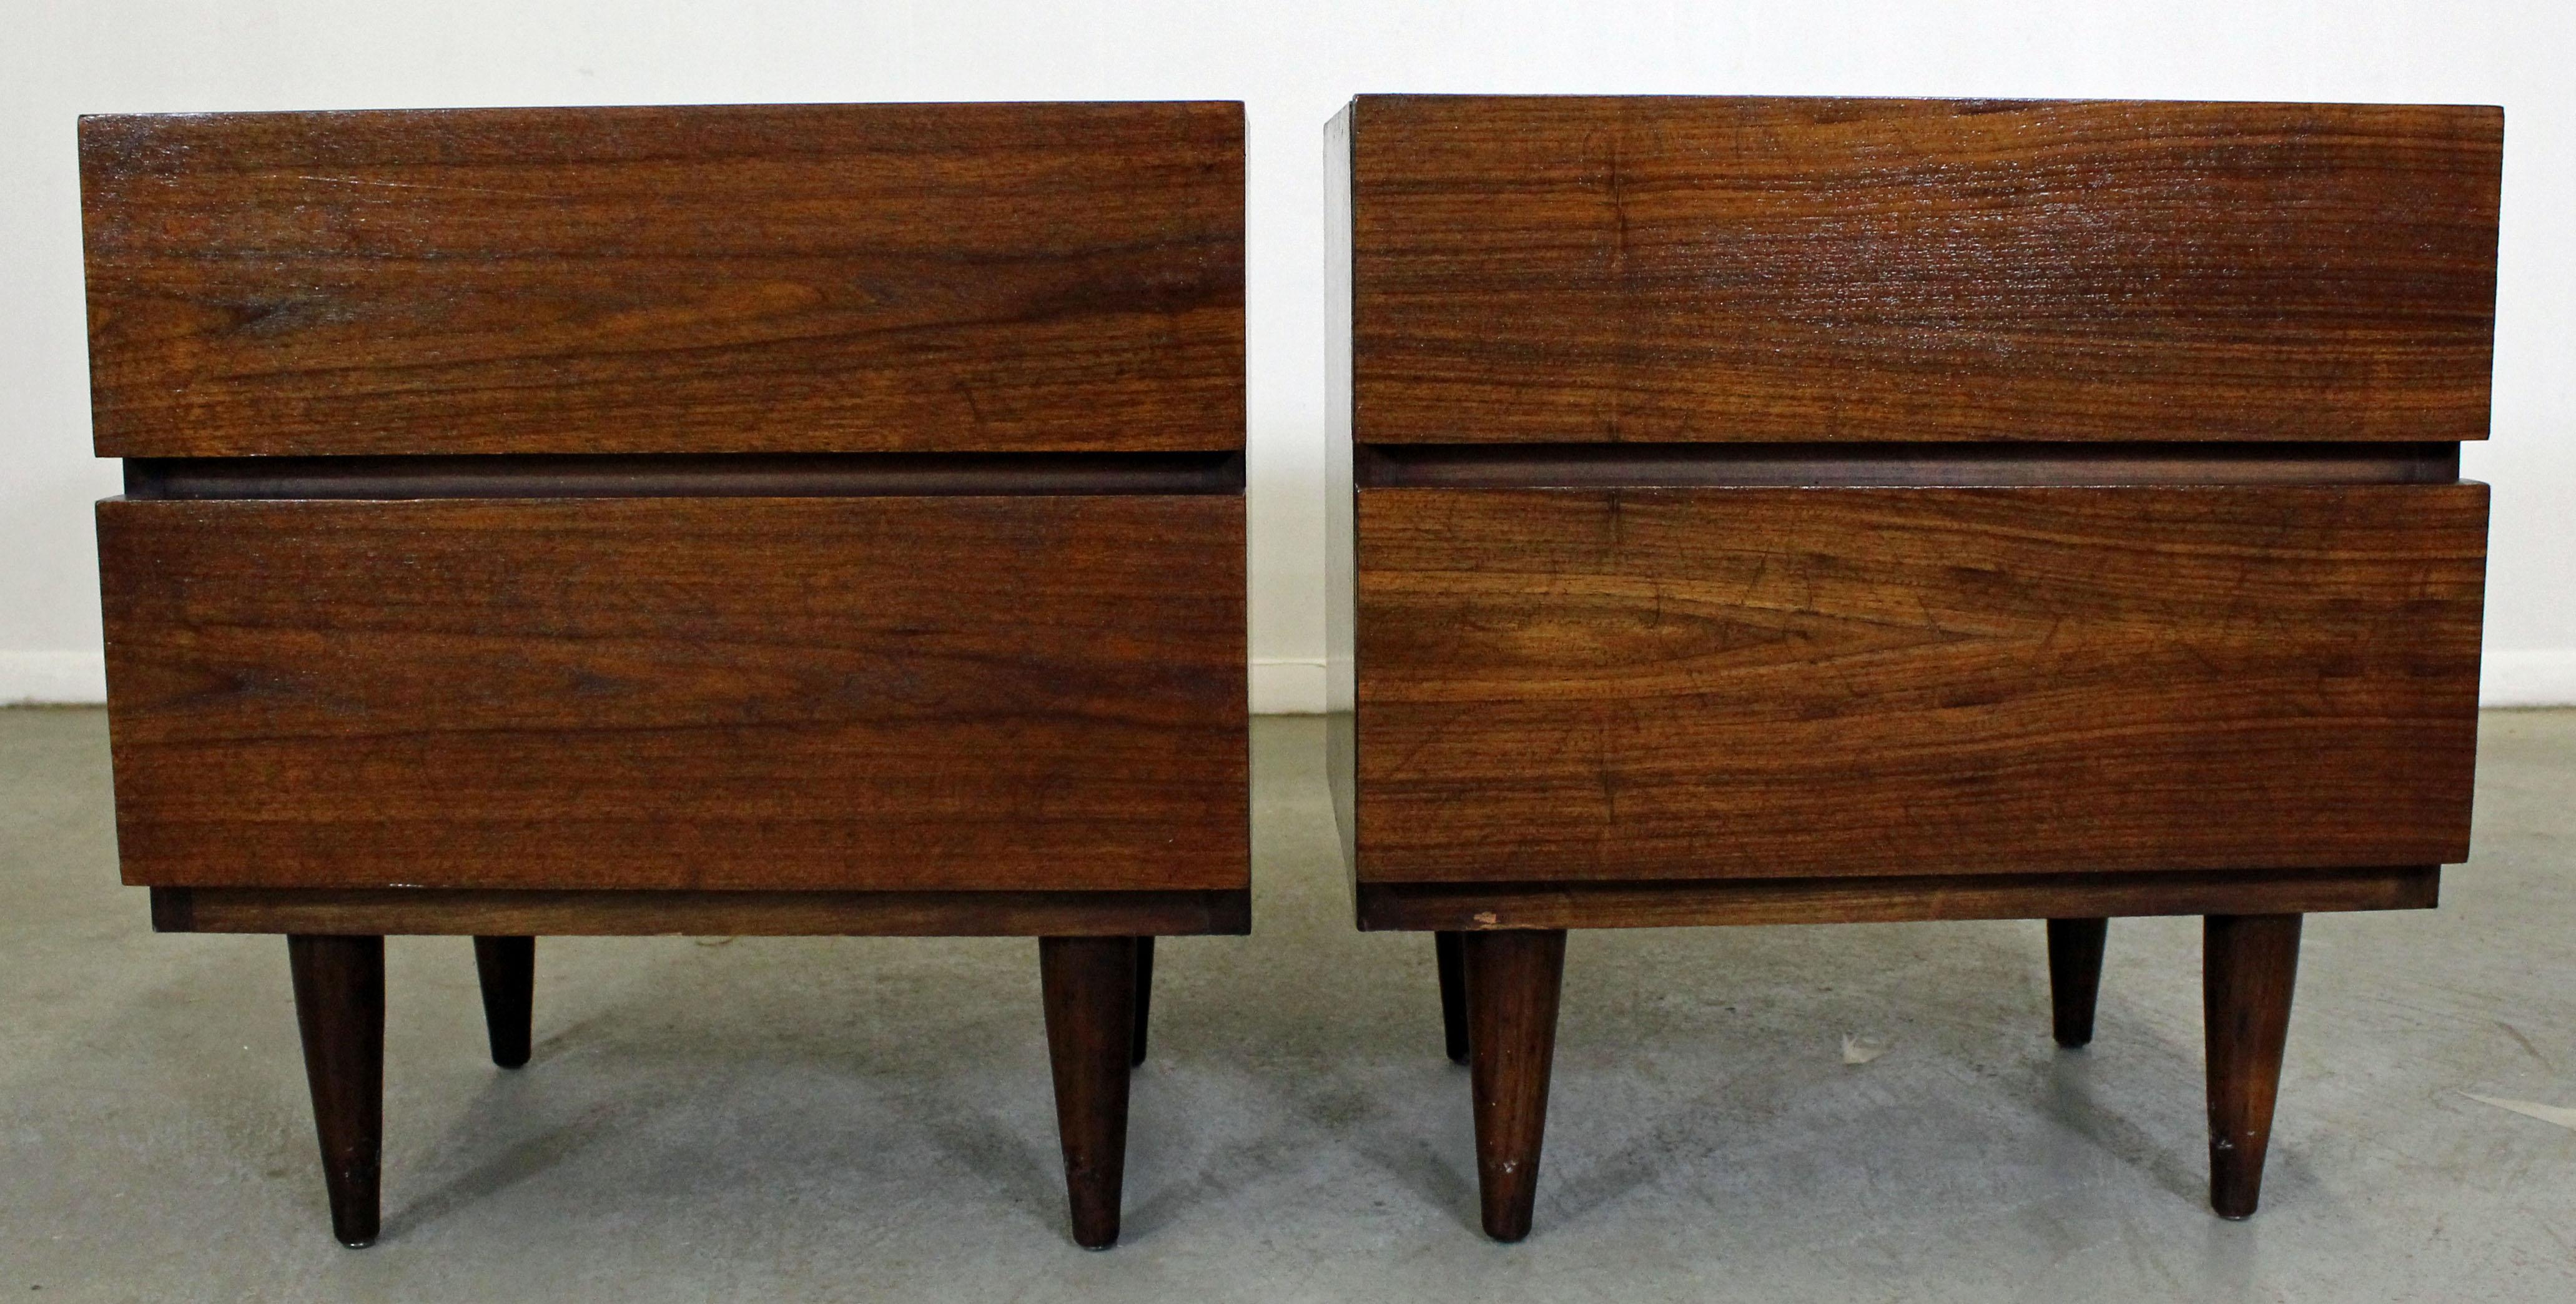 Offered is a pair of walnut nightstands made by American of Martinsville. Feature two drawers with hidden pulls. They are in good condition; tops and sides have been refinished. They are signed by American of Martinsville.

Dimensions:
22